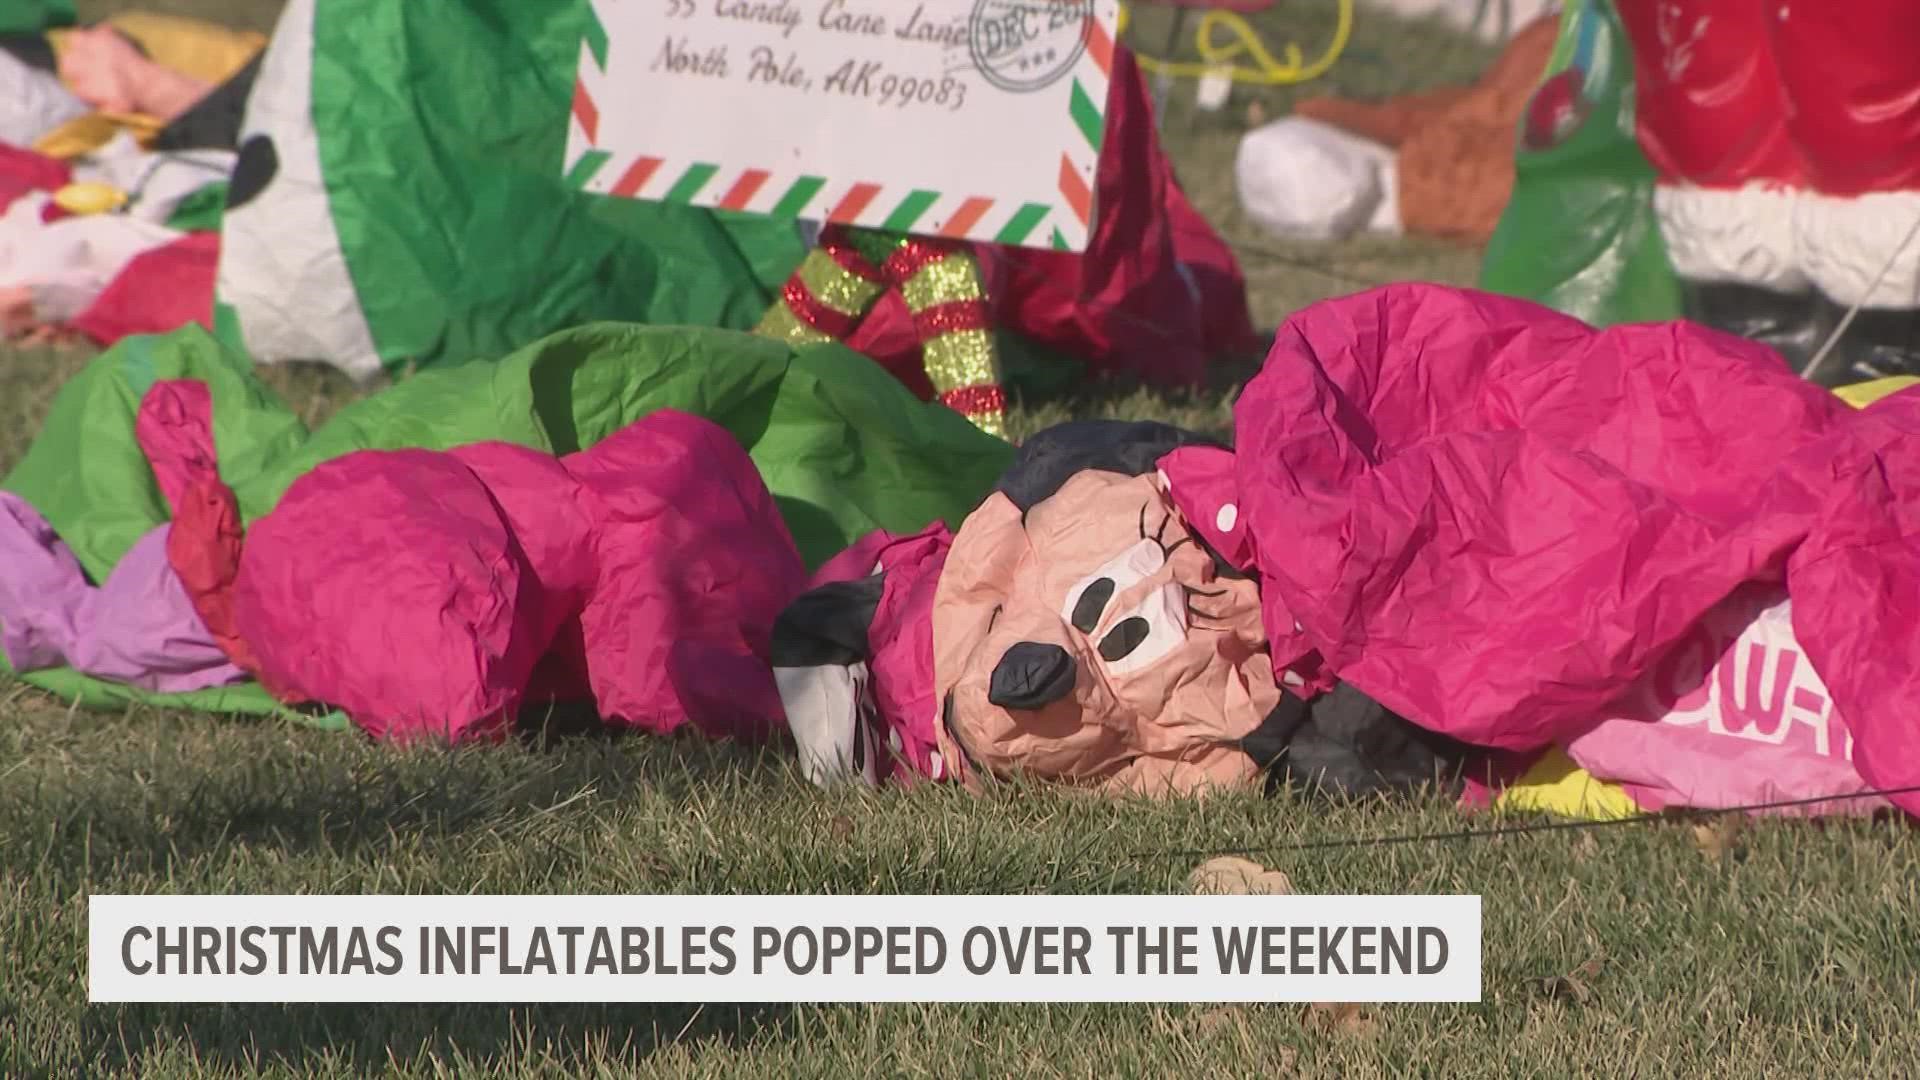 Clive police are searching for answers this evening after reports of inflatable Christmas decorations were damaged over the weekend.